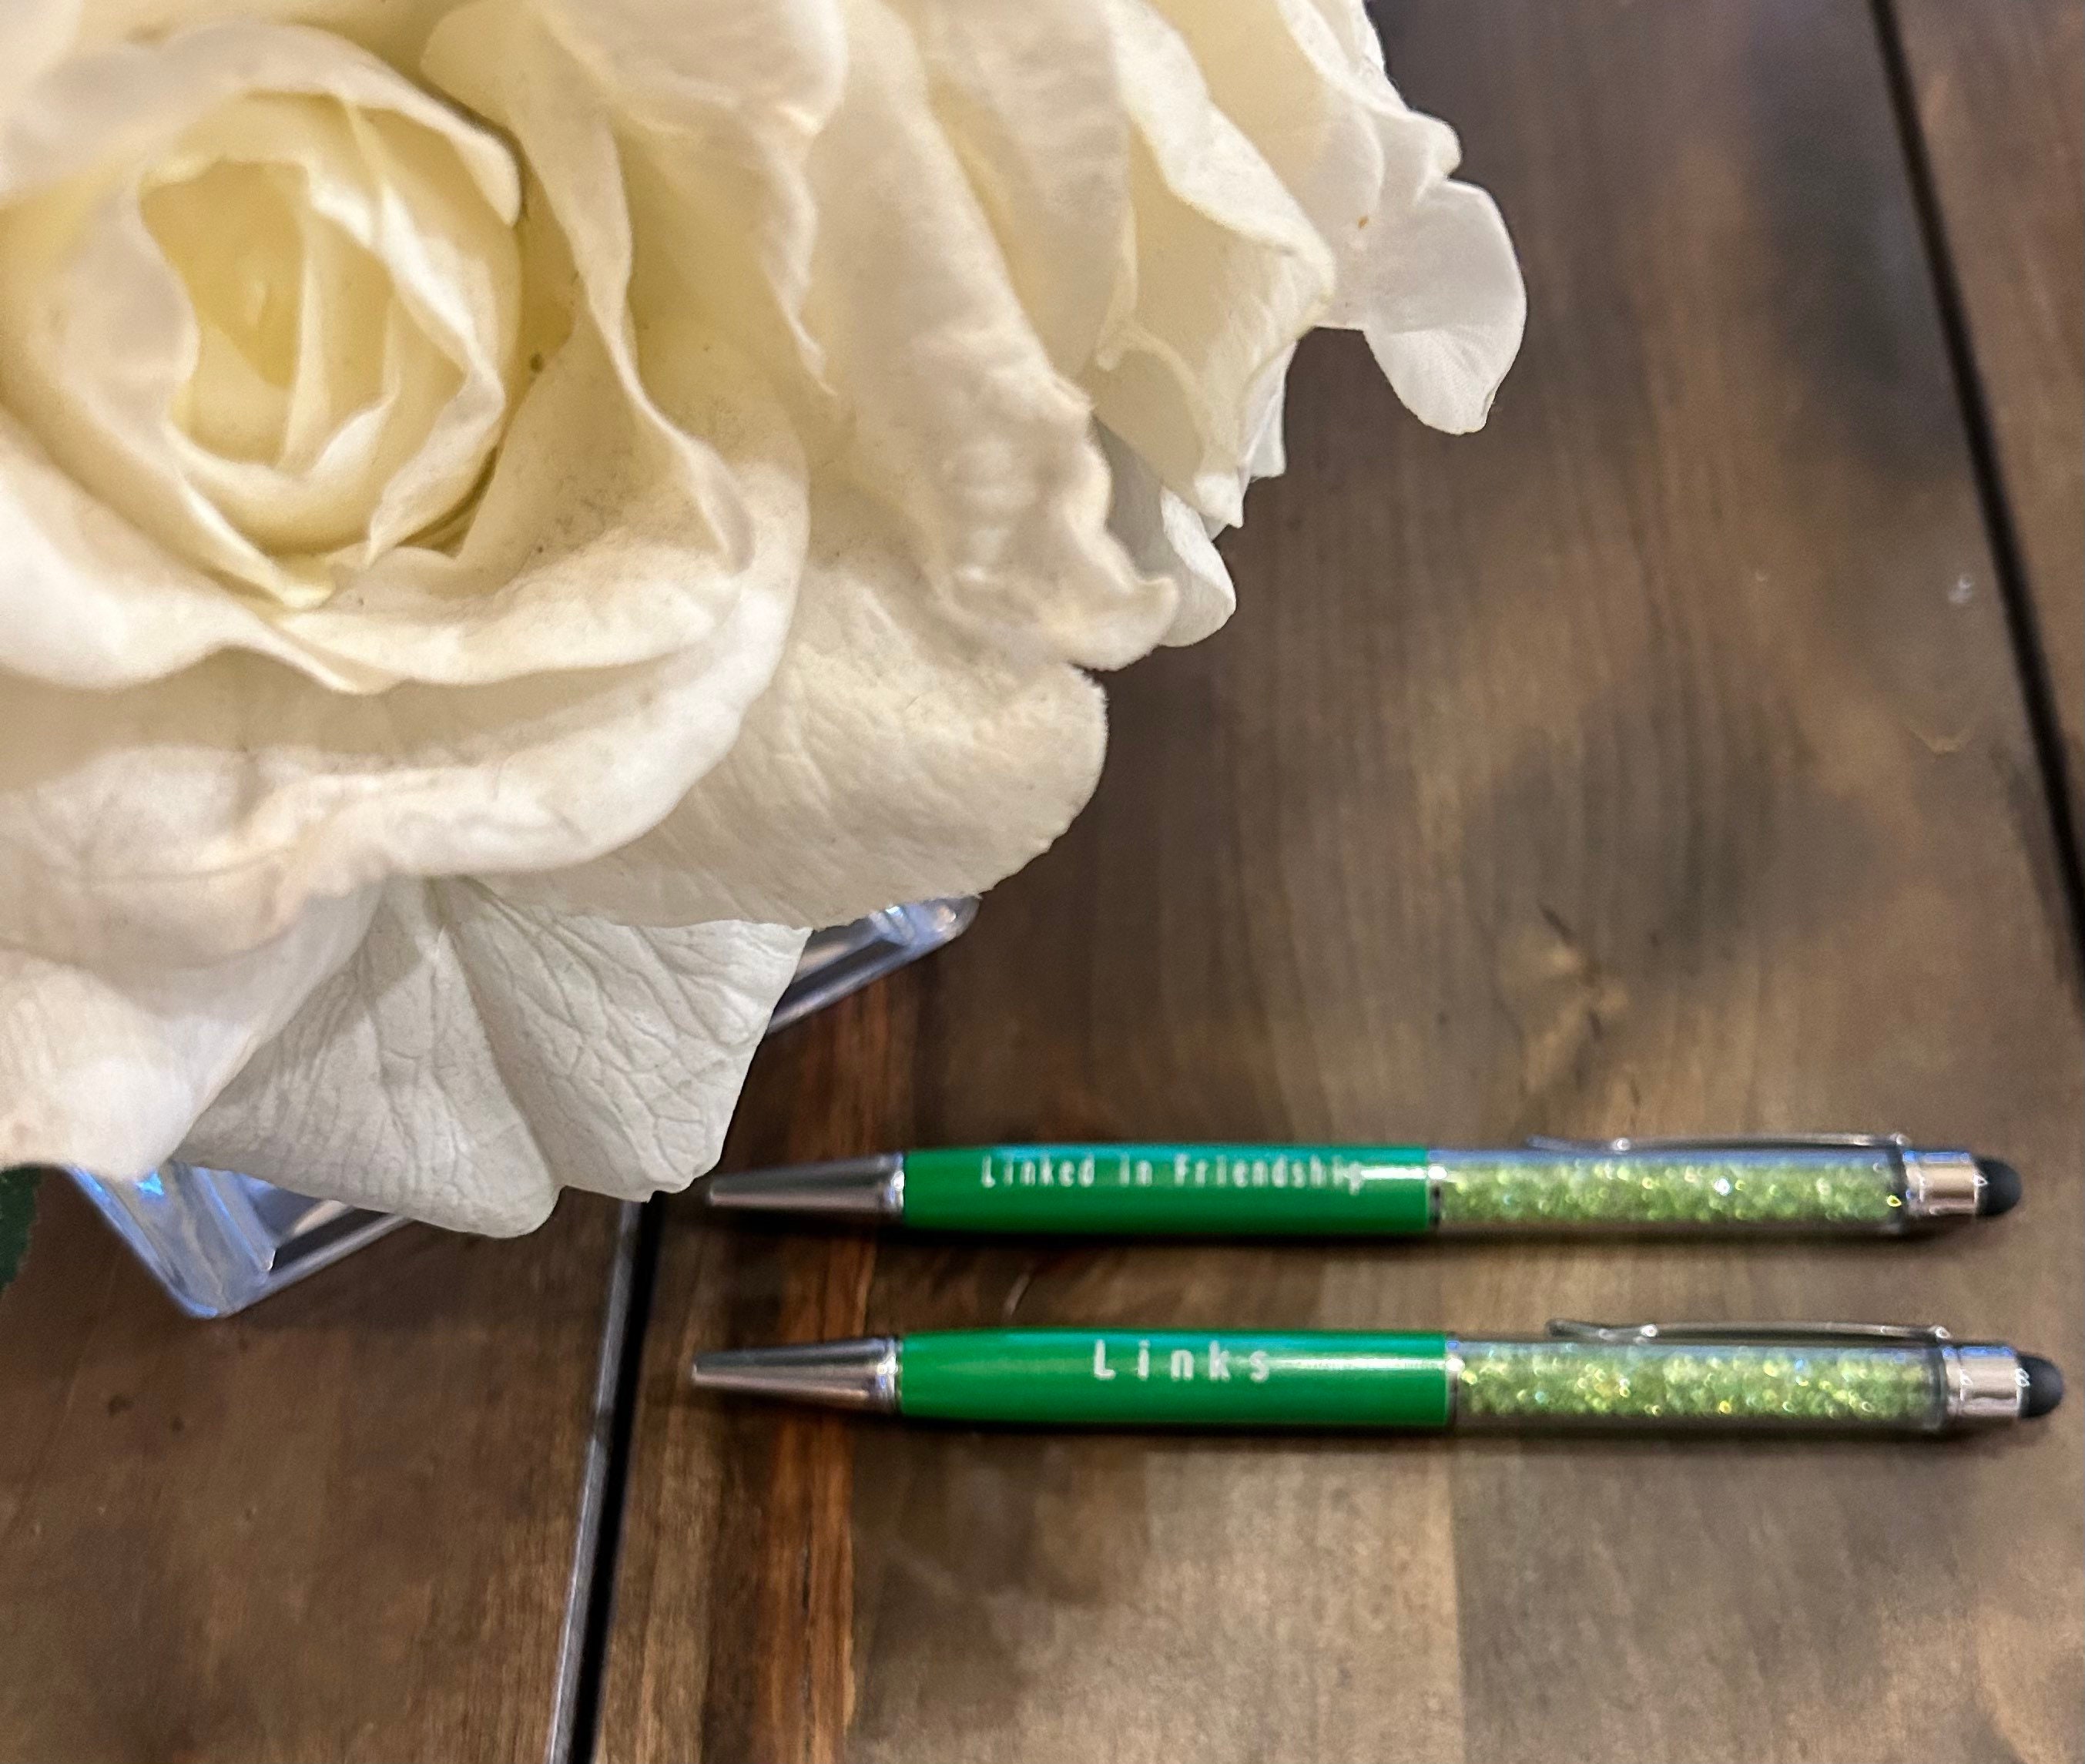 AKA White Ink Pen with Large Pearl – Rosa's Greek Boutique, Inc.